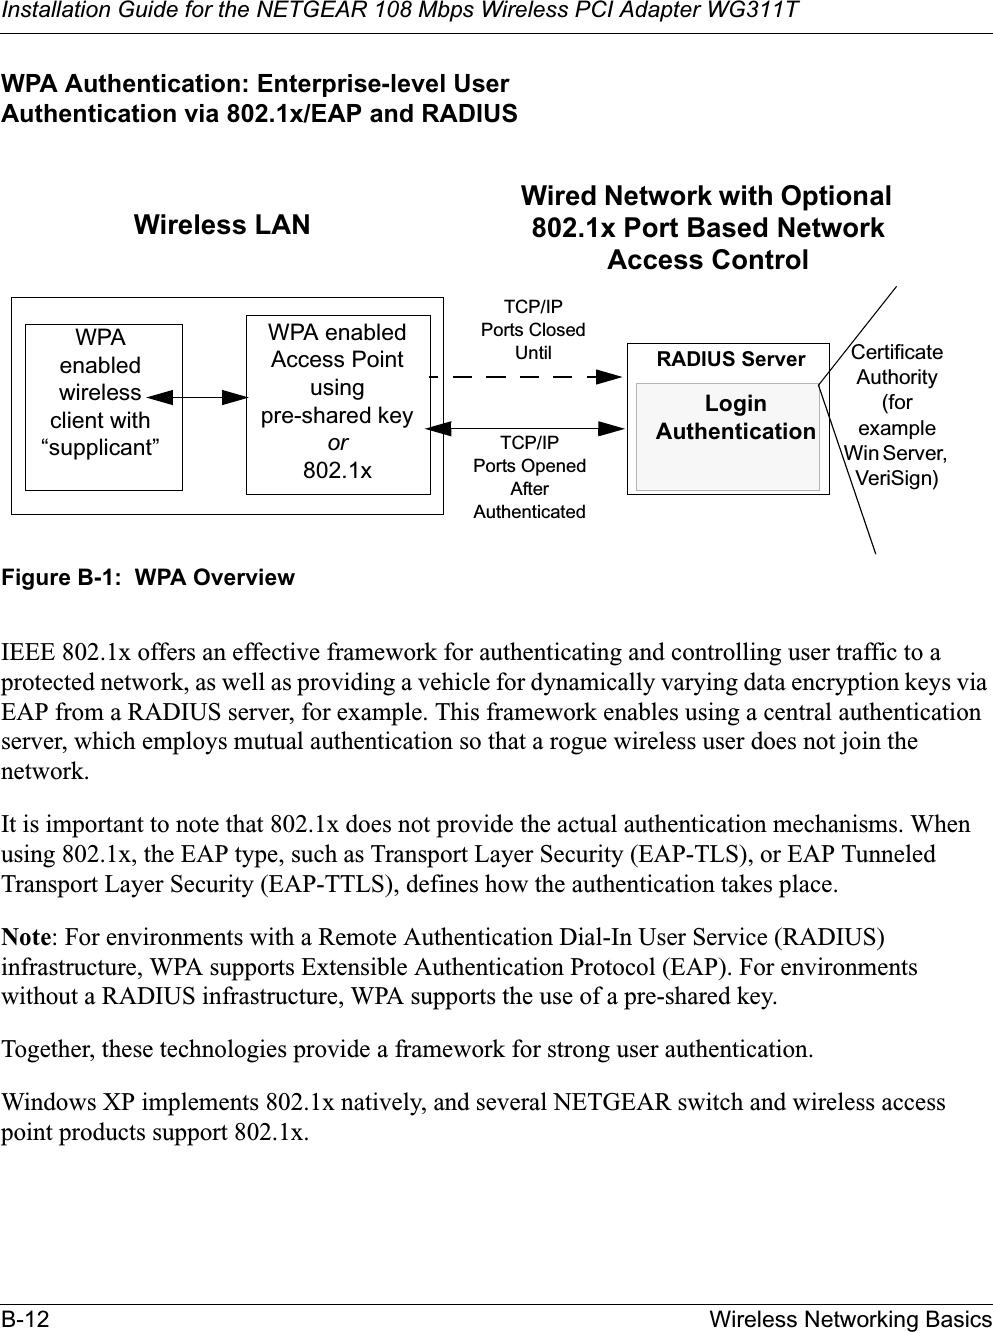 Installation Guide for the NETGEAR 108 Mbps Wireless PCI Adapter WG311TB-12 Wireless Networking BasicsWPA Authentication: Enterprise-level User Authentication via 802.1x/EAP and RADIUSFigure B-1:  WPA OverviewIEEE 802.1x offers an effective framework for authenticating and controlling user traffic to a protected network, as well as providing a vehicle for dynamically varying data encryption keys via EAP from a RADIUS server, for example. This framework enables using a central authentication server, which employs mutual authentication so that a rogue wireless user does not join the network. It is important to note that 802.1x does not provide the actual authentication mechanisms. When using 802.1x, the EAP type, such as Transport Layer Security (EAP-TLS), or EAP Tunneled Transport Layer Security (EAP-TTLS), defines how the authentication takes place. Note: For environments with a Remote Authentication Dial-In User Service (RADIUS) infrastructure, WPA supports Extensible Authentication Protocol (EAP). For environments without a RADIUS infrastructure, WPA supports the use of a pre-shared key.Together, these technologies provide a framework for strong user authentication. Windows XP implements 802.1x natively, and several NETGEAR switch and wireless access point products support 802.1x. CertificateAuthority (for example Win Server,VeriSign)WPA enabled wirelessclient with “supplicant”TCP/IPPorts ClosedUntil  RADIUS ServerWired Network with Optional 802.1x Port Based Network Access ControlWPA enabledAccess Point usingpre-shared key or802.1xTCP/IPPorts OpenedAfter AuthenticatedWireless LANLoginAuthentication